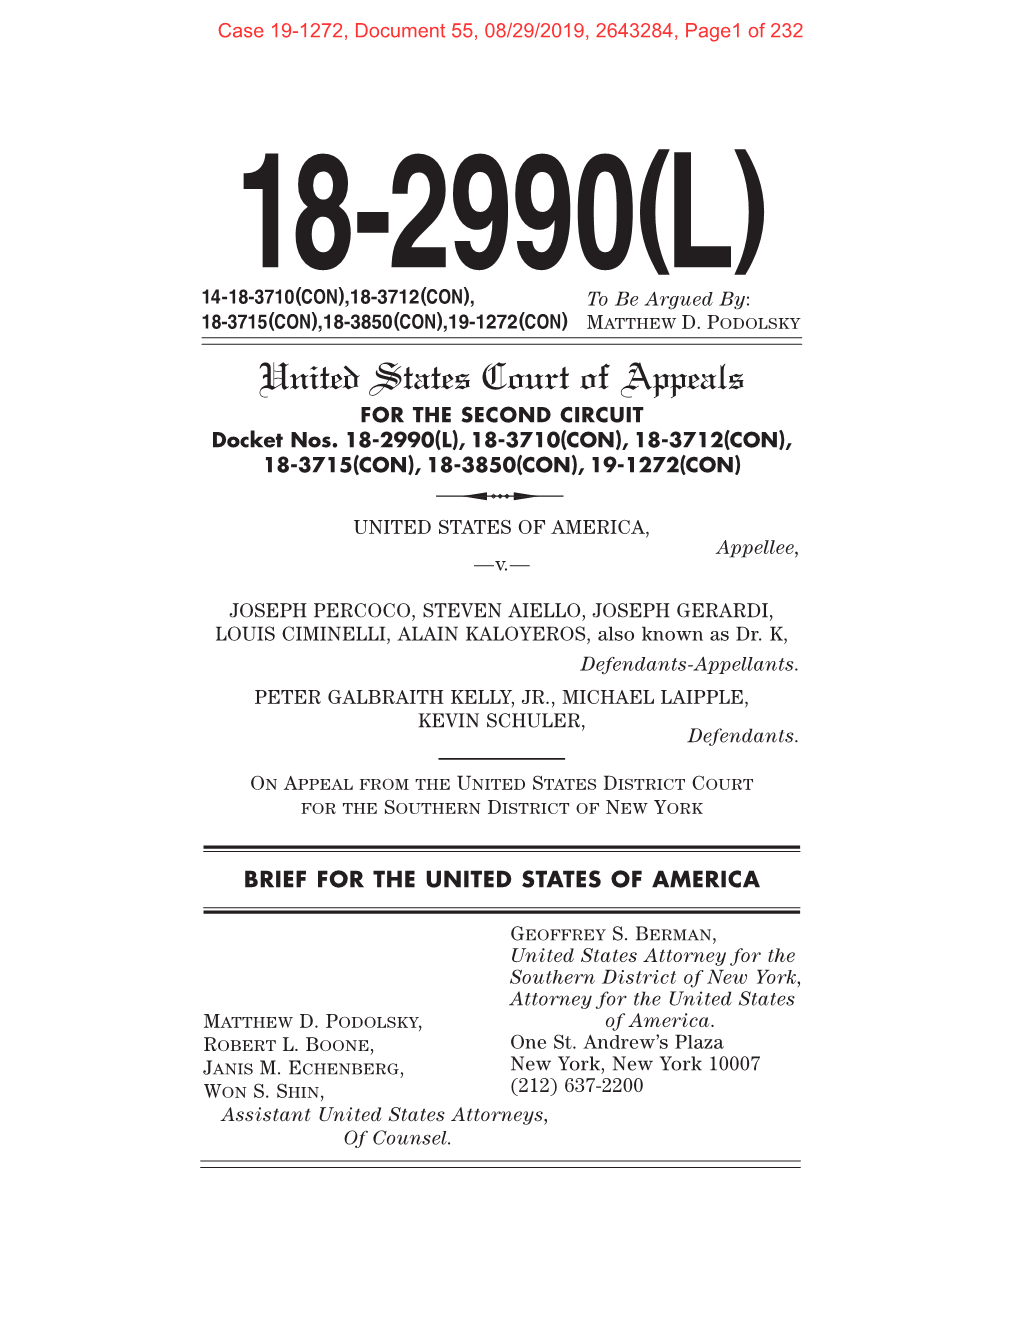 United States Court of Appeals for the SECOND CIRCUIT Docket Nos